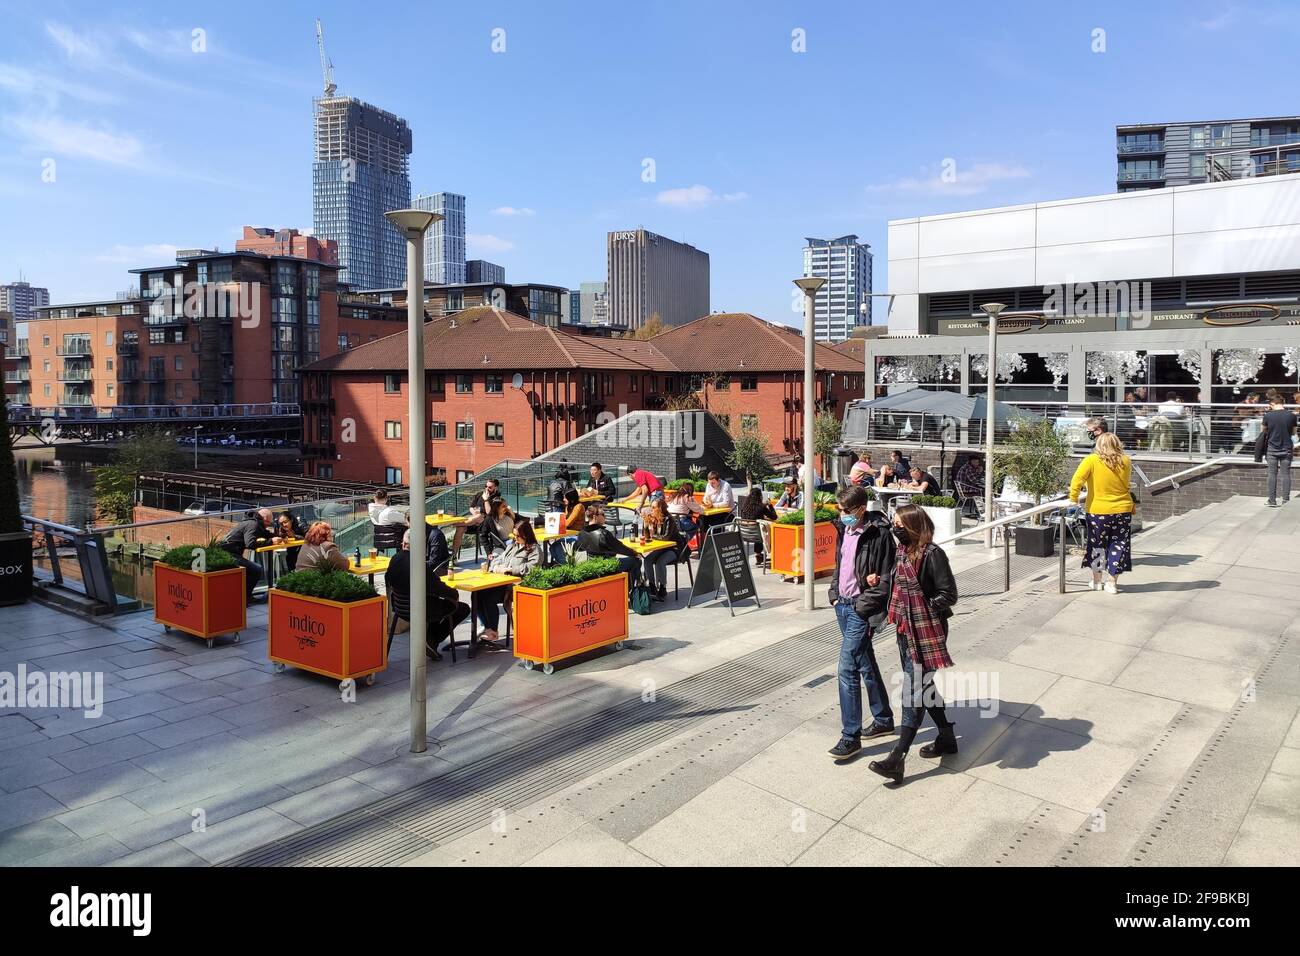 Birmingham city centre, UK. 17th Apr, 2021. Shoppers and revellers took advantage of the beautiful weather in Birmingham city centre to enjoy 'Super Saturday'. Thousands of people came out despite the funeral of Prince Philip taking place today. Pubs and bars were full and streets were a sea of people. Pic by Credit: Ben Formby/Alamy Live News Stock Photo